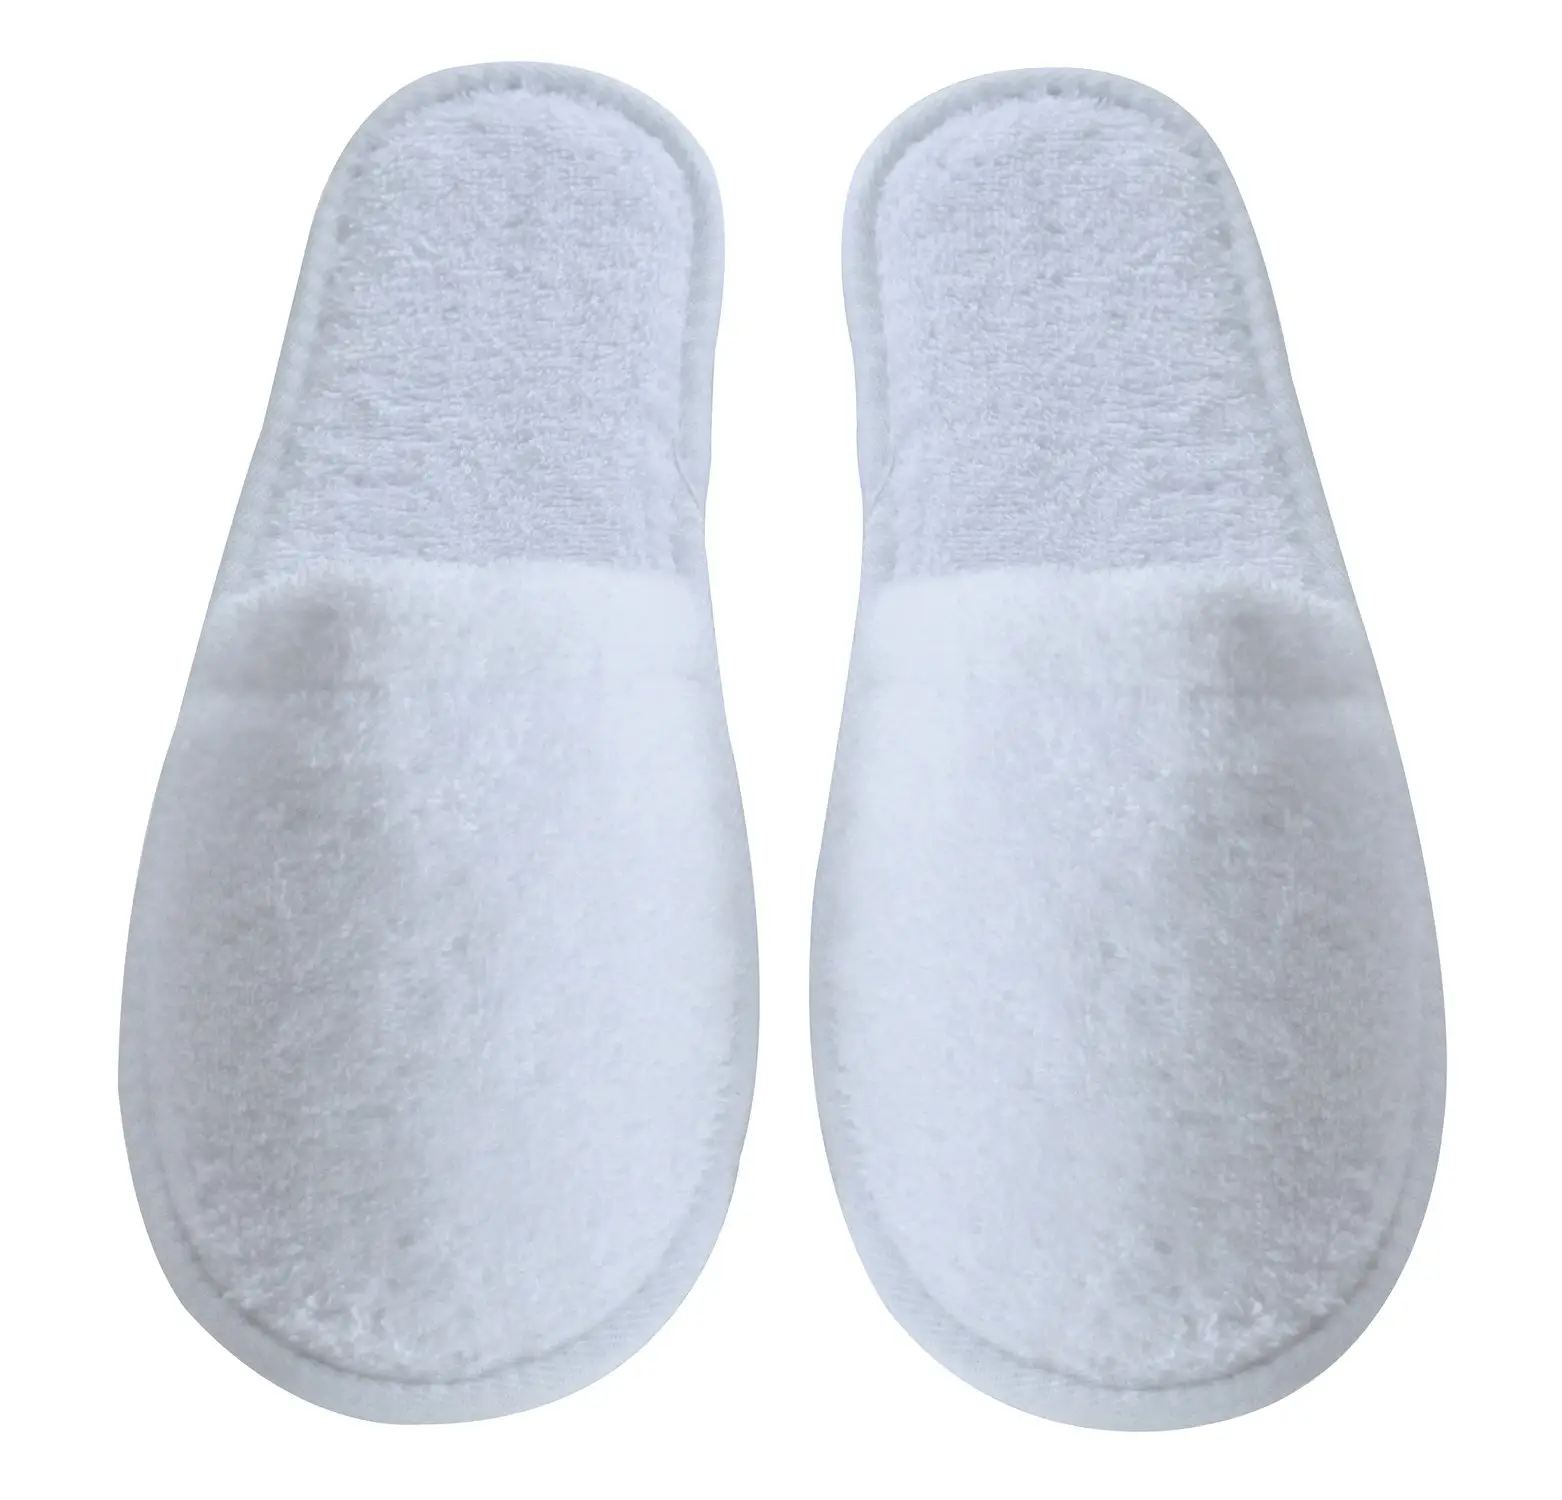 Custom hotel_disposable_slippers closed toe white terry hotel slippers for adults